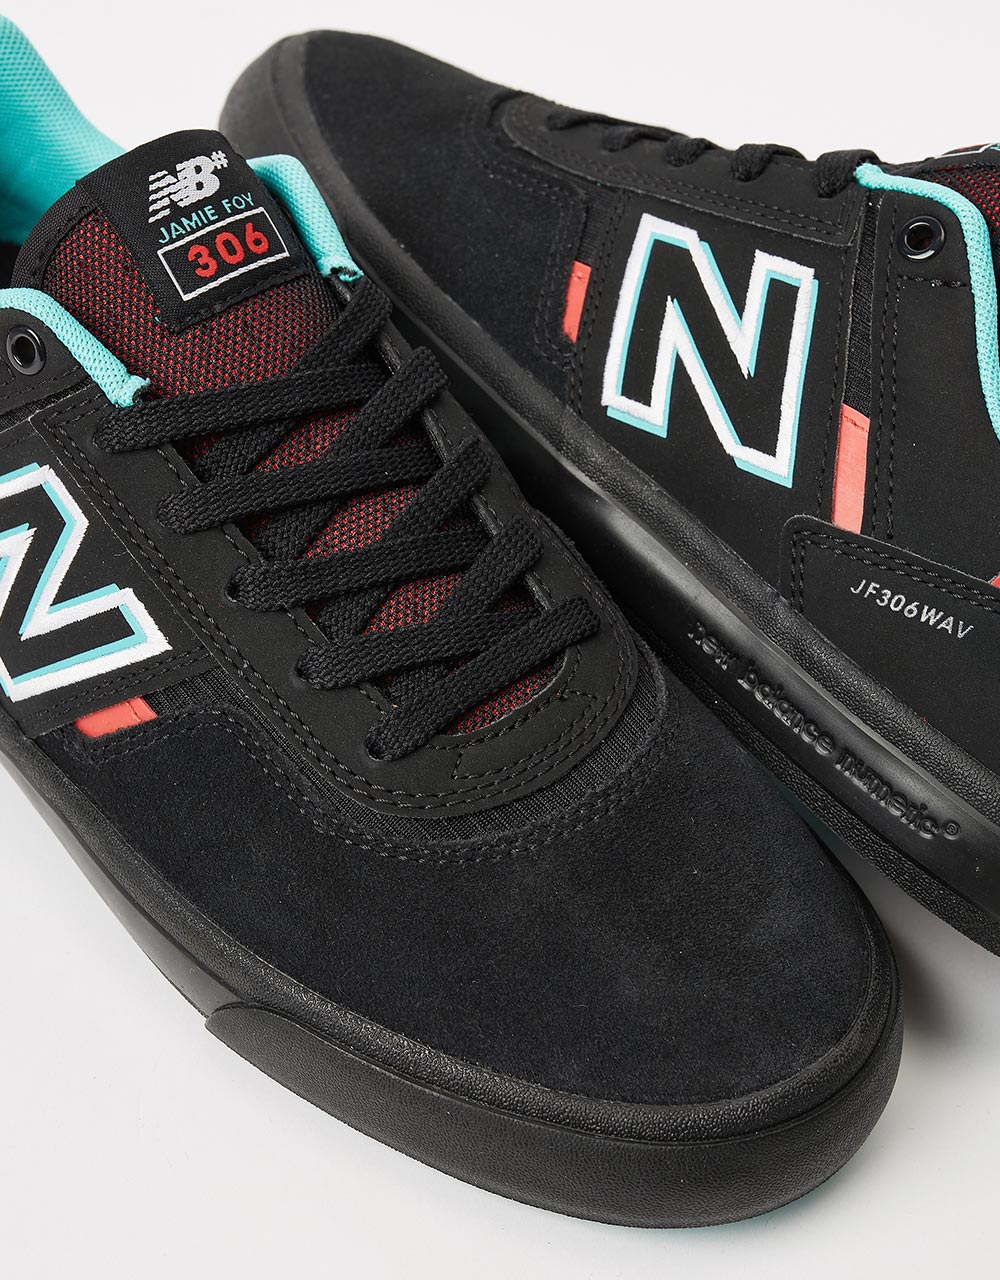 New Balance Numeric 306 Skate Shoes - Black/Red